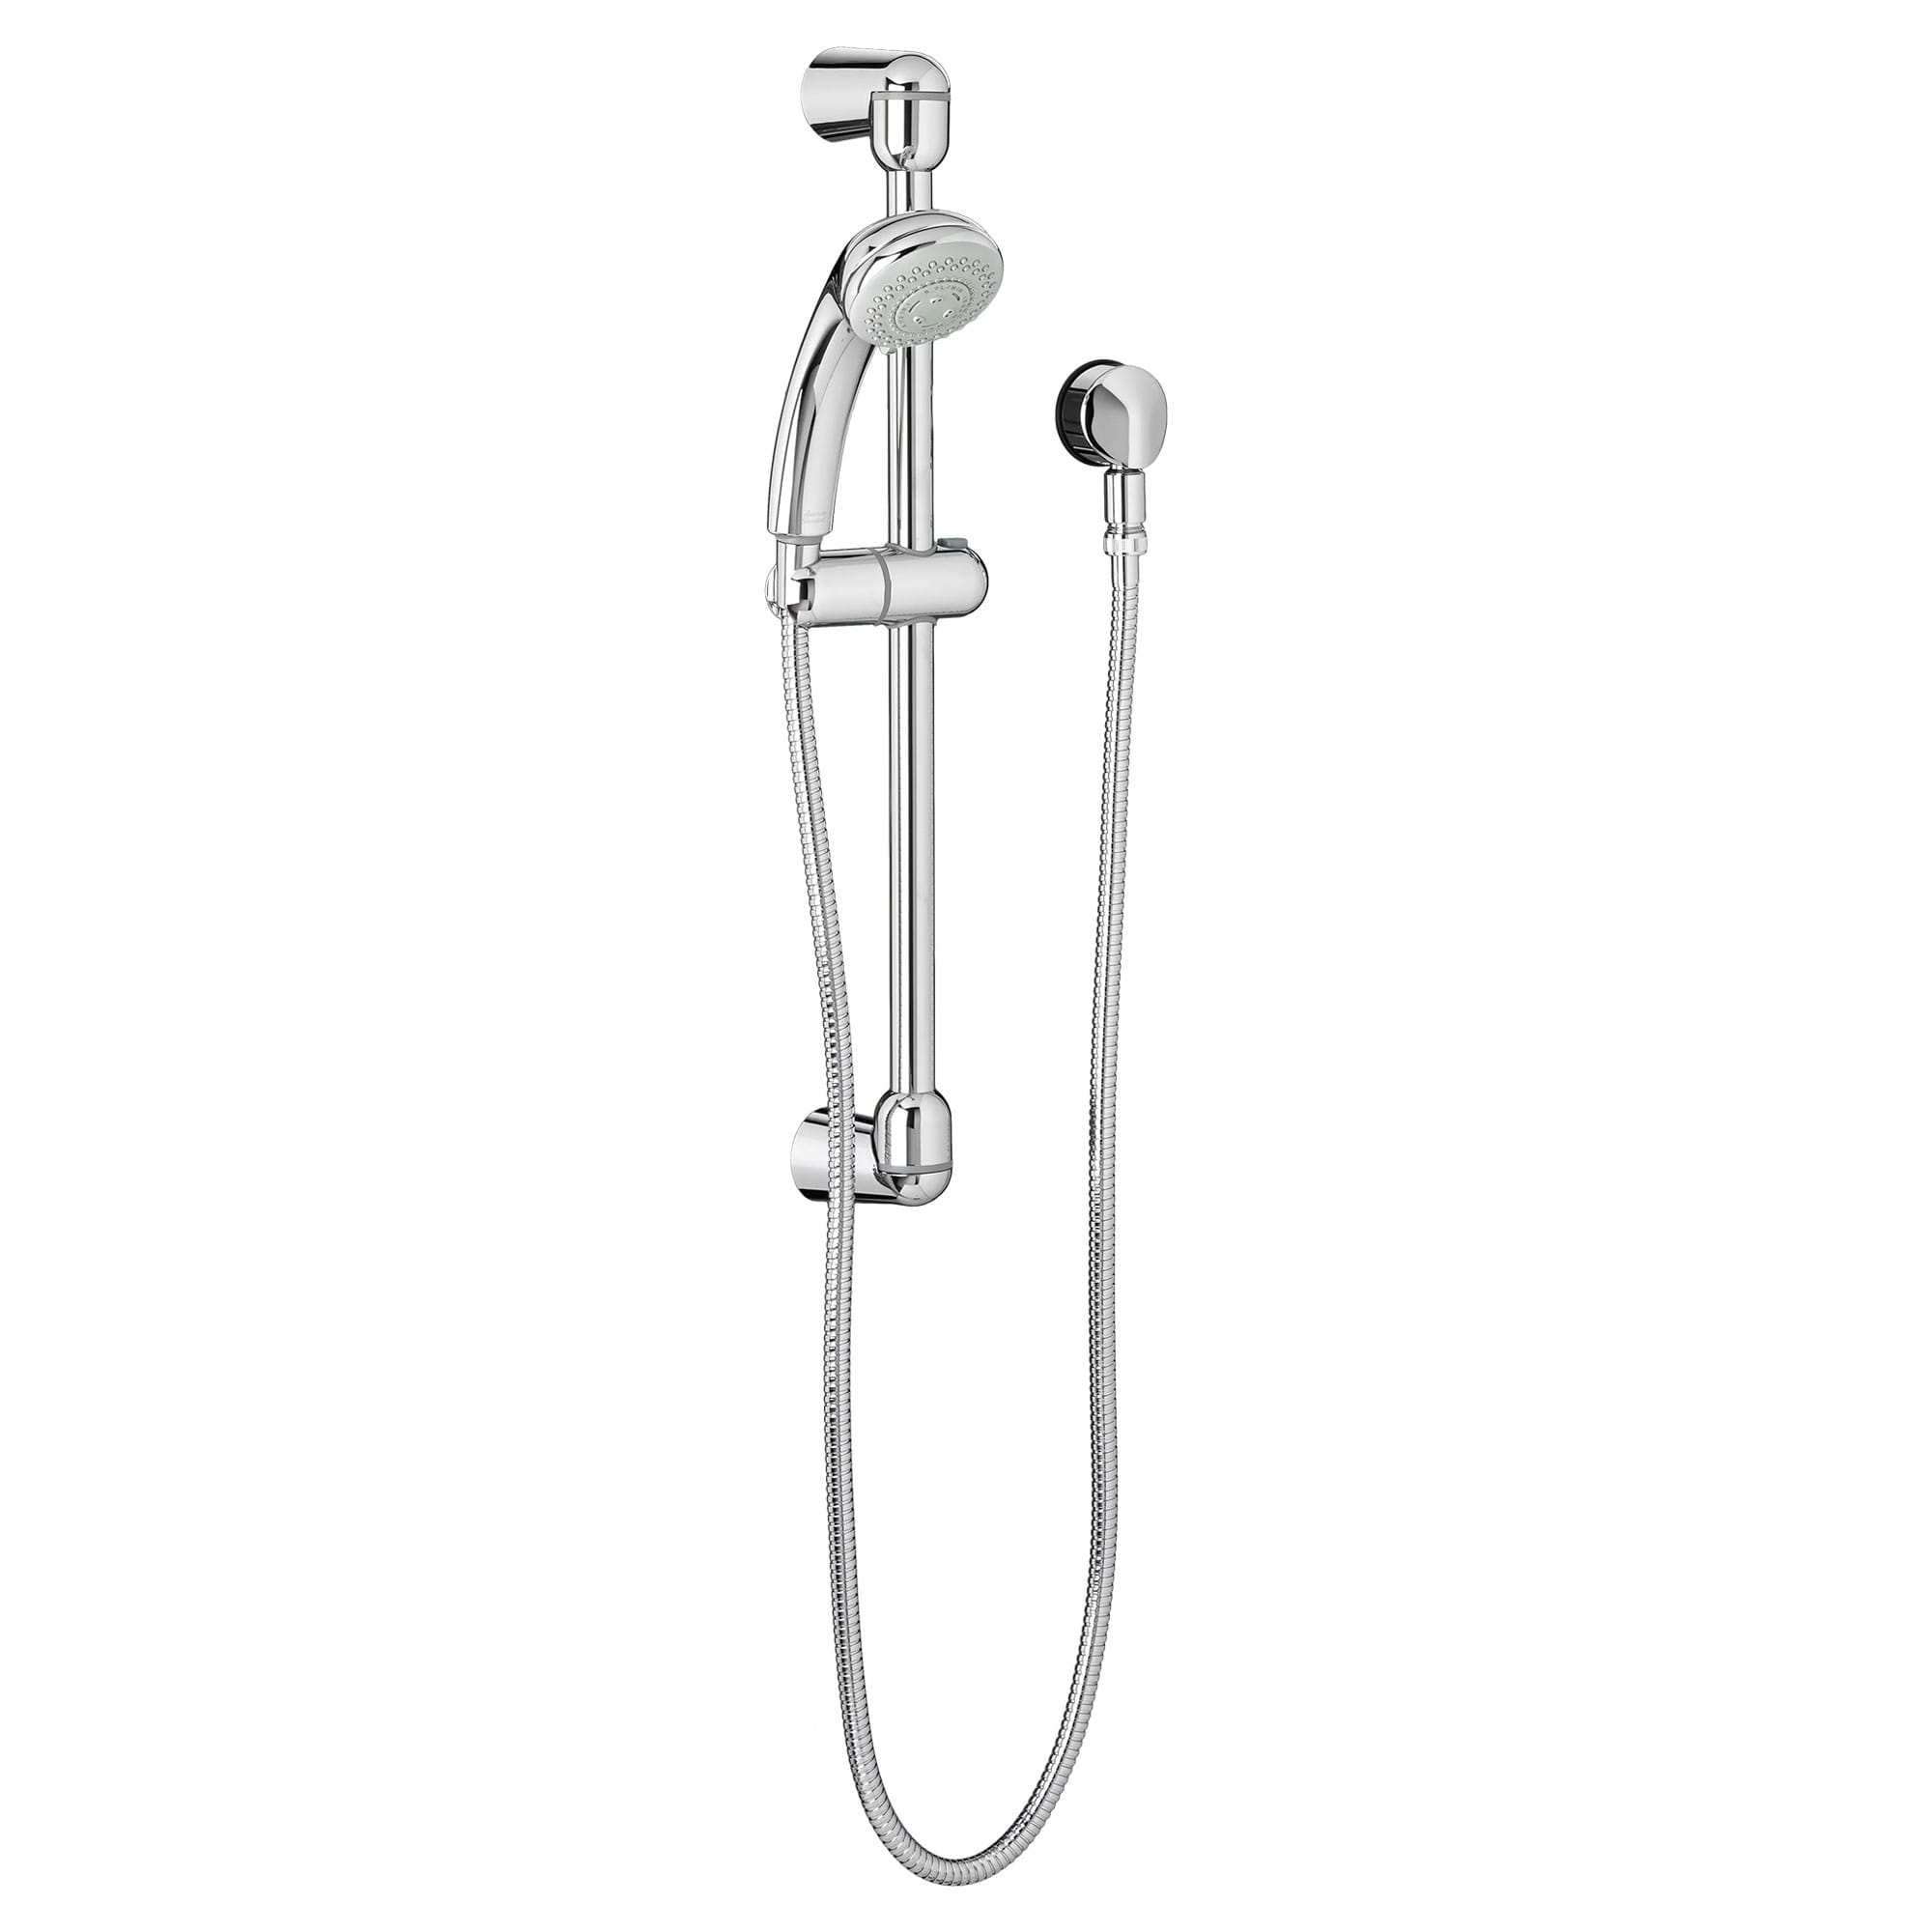 25-In. Single-Function 1.5 GPM Shower System Kit